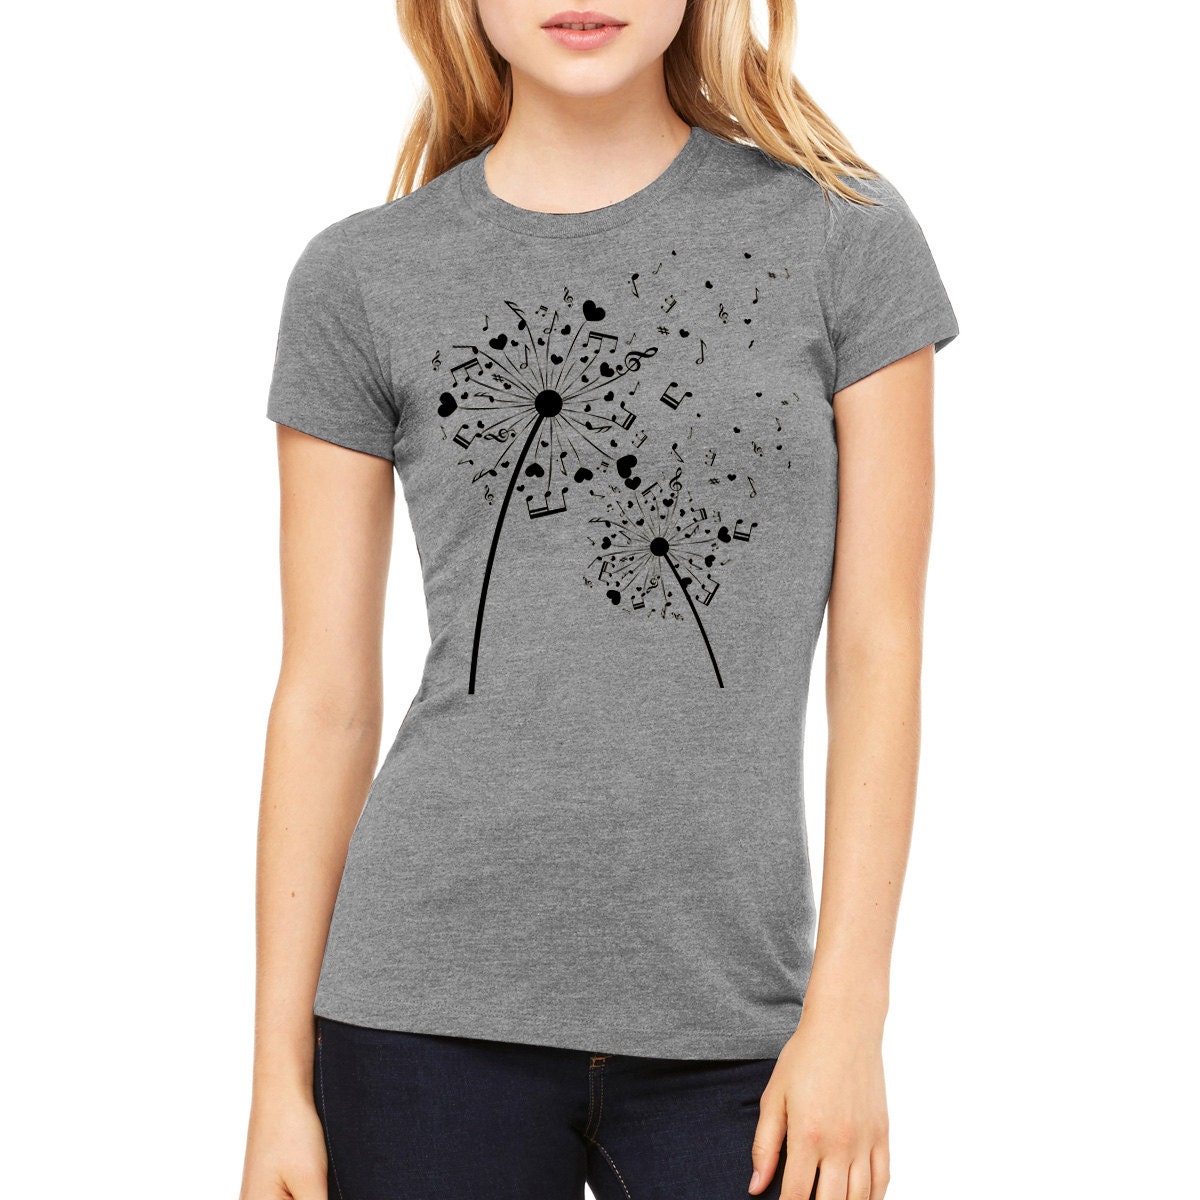 Music T-shirt Dandelion Made of Music Symbols Notes and - Etsy